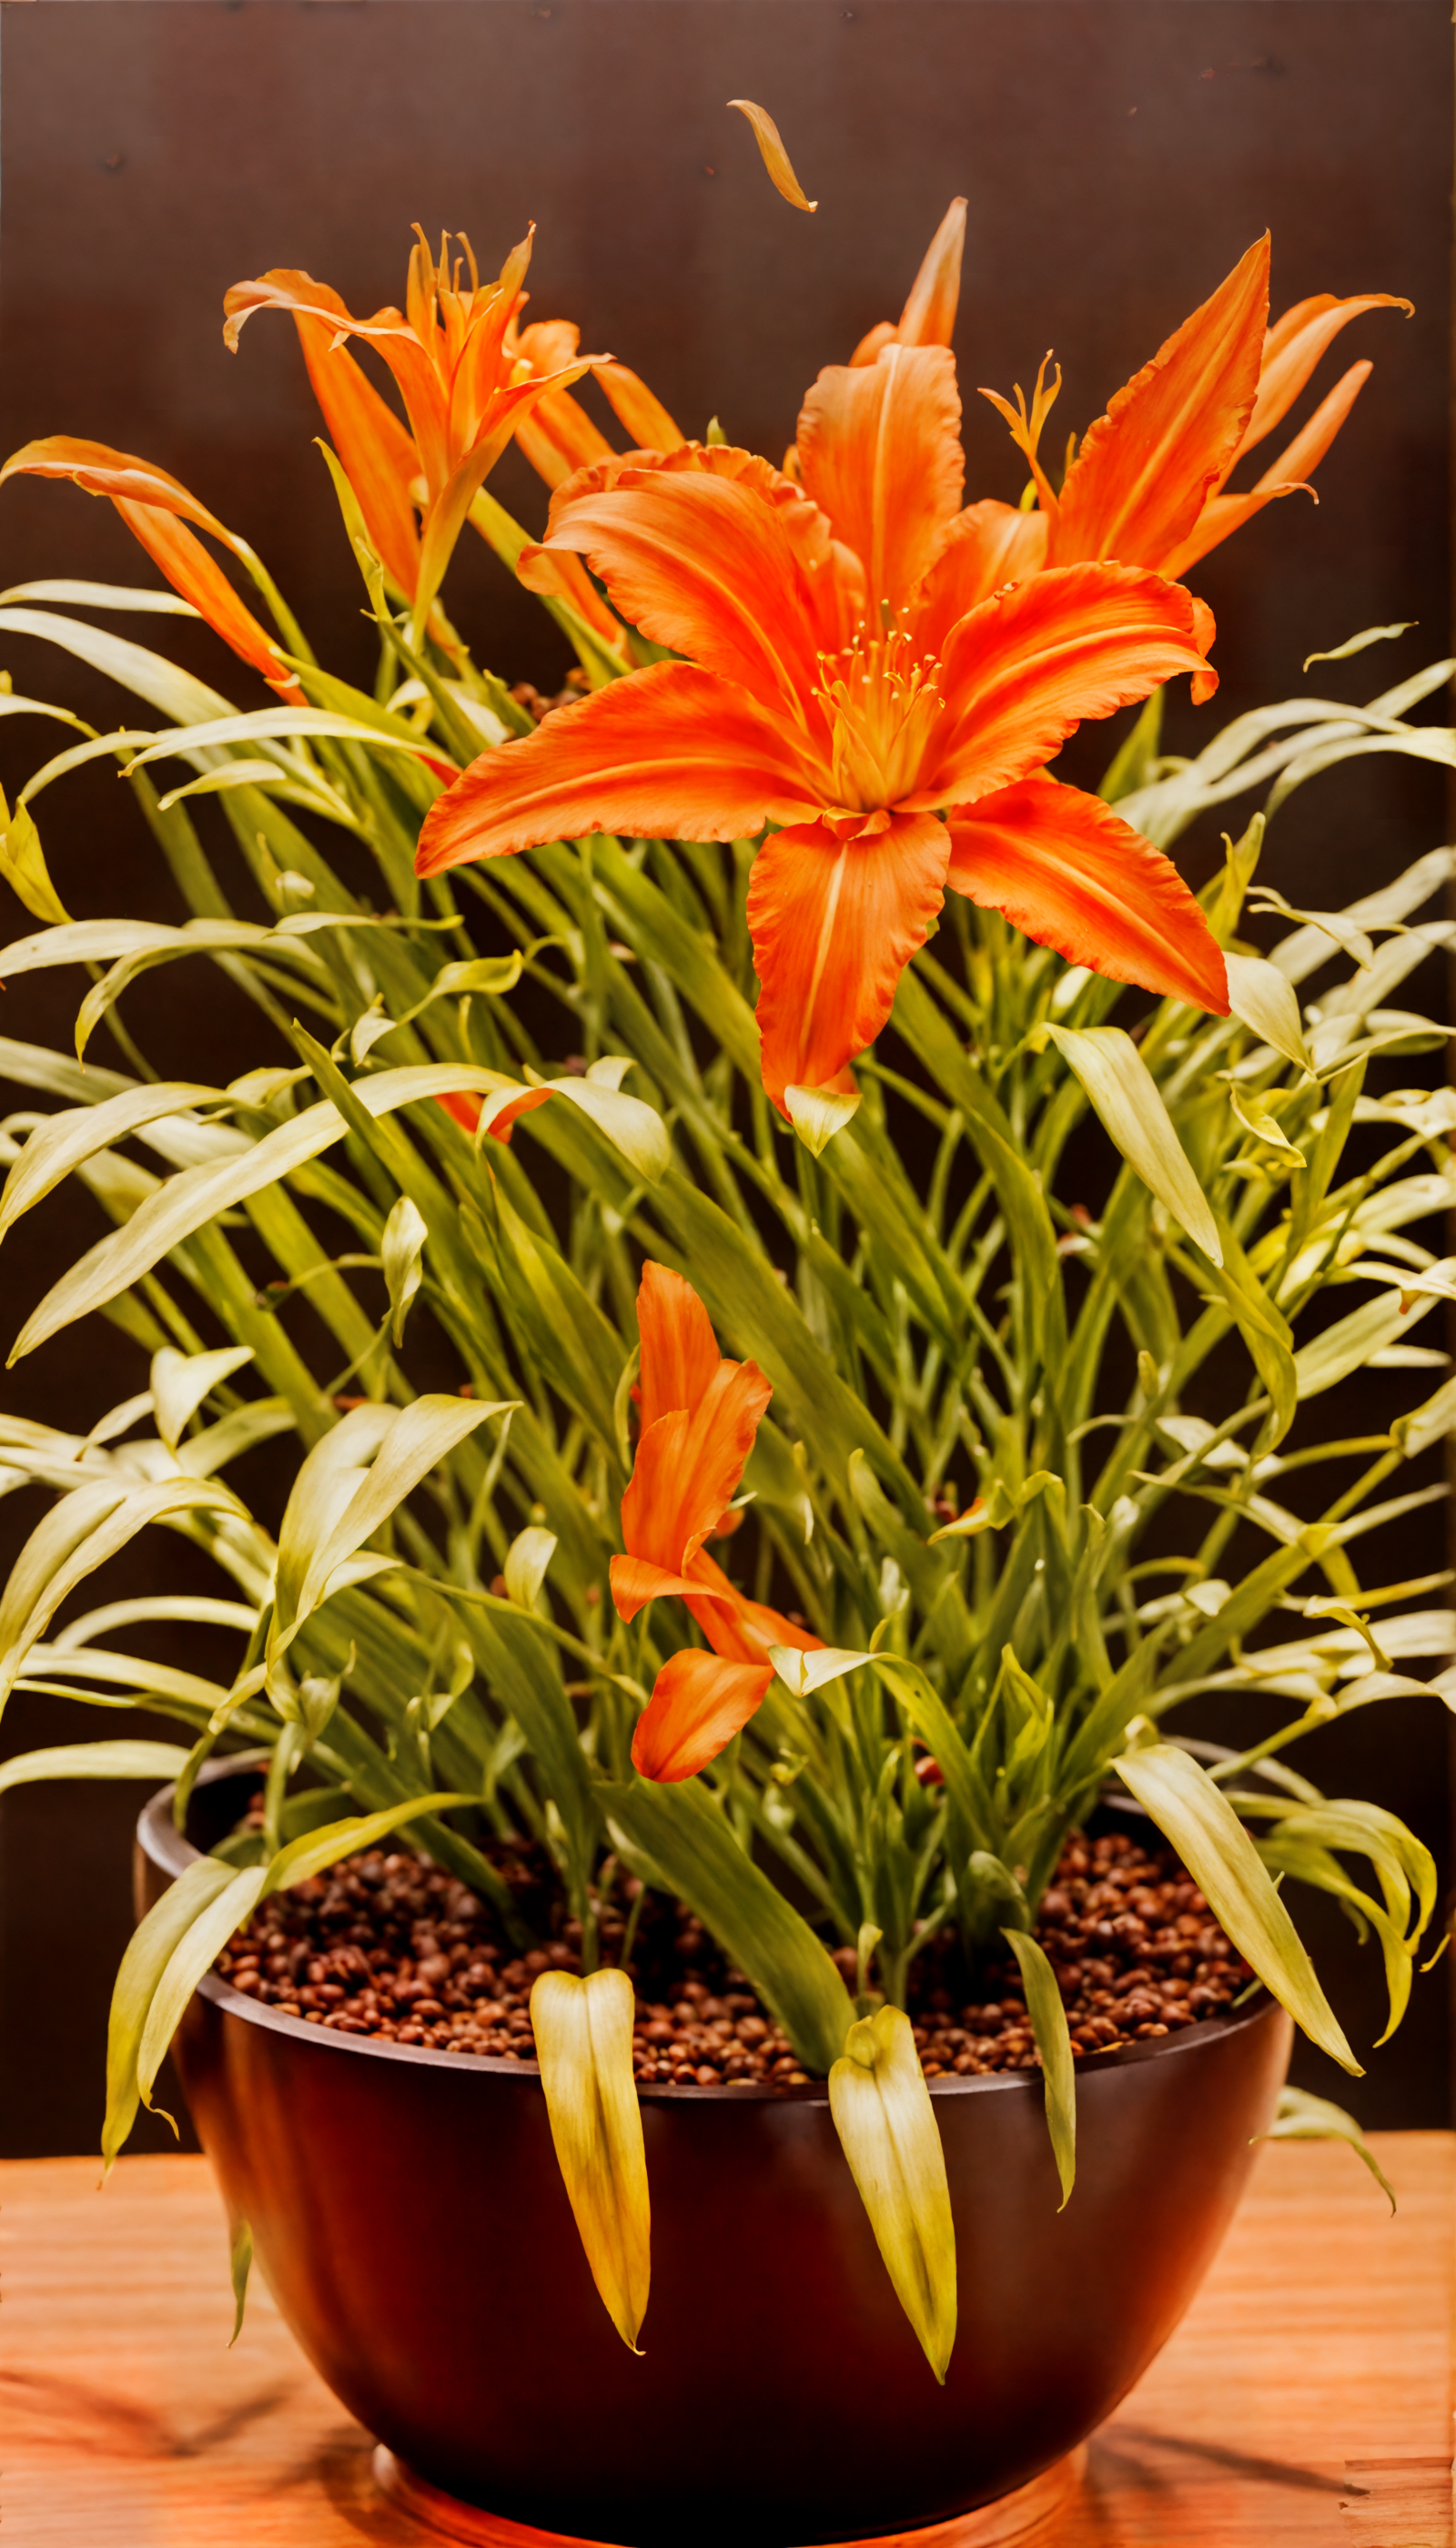 A bowl of Hemerocallis fulva (orange daylilies) on a wooden table, with clear lighting and a dark background.